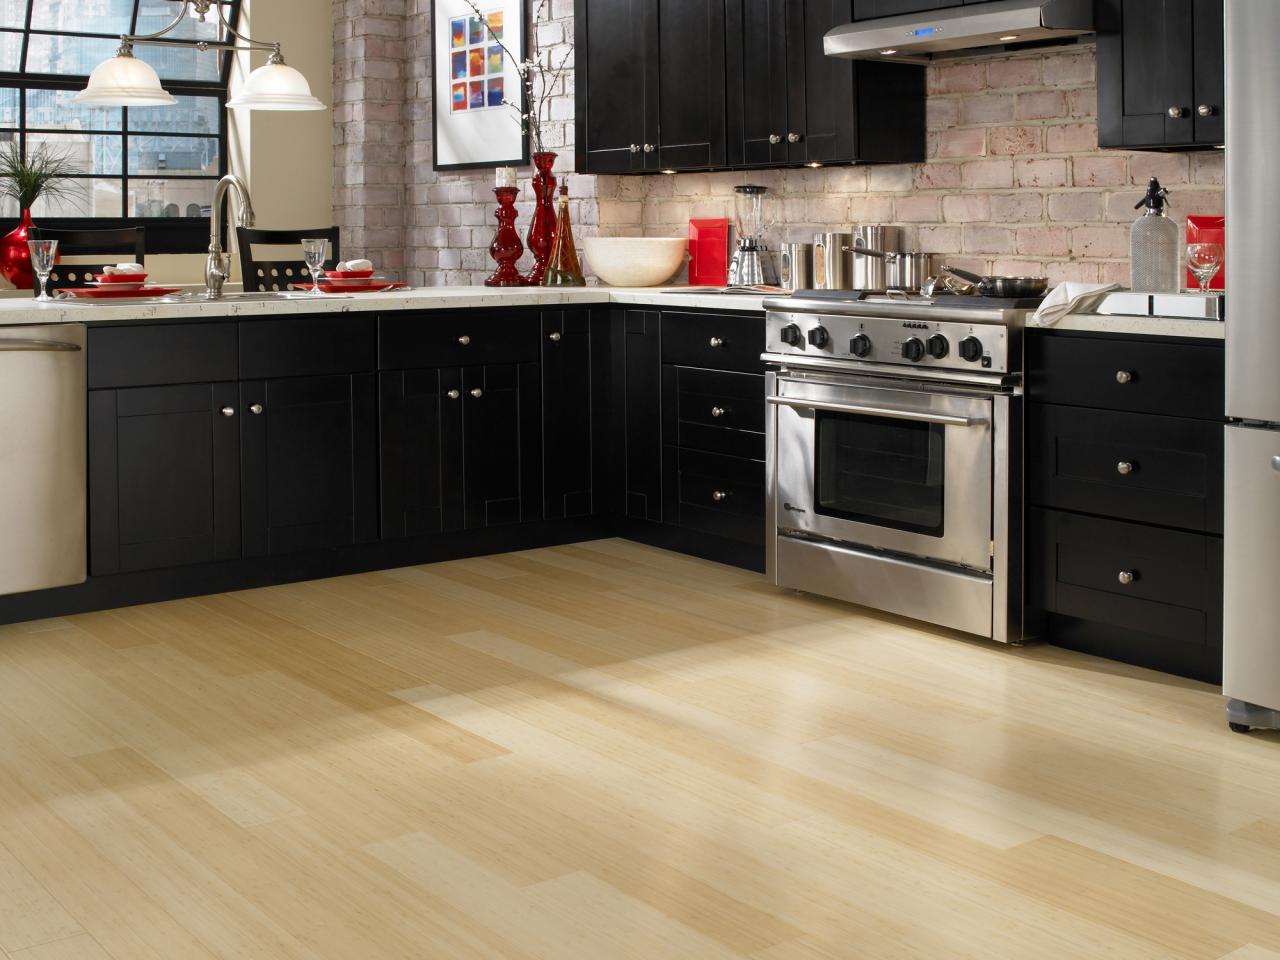 What Should The Kitchen Floor Be Like Icreatived